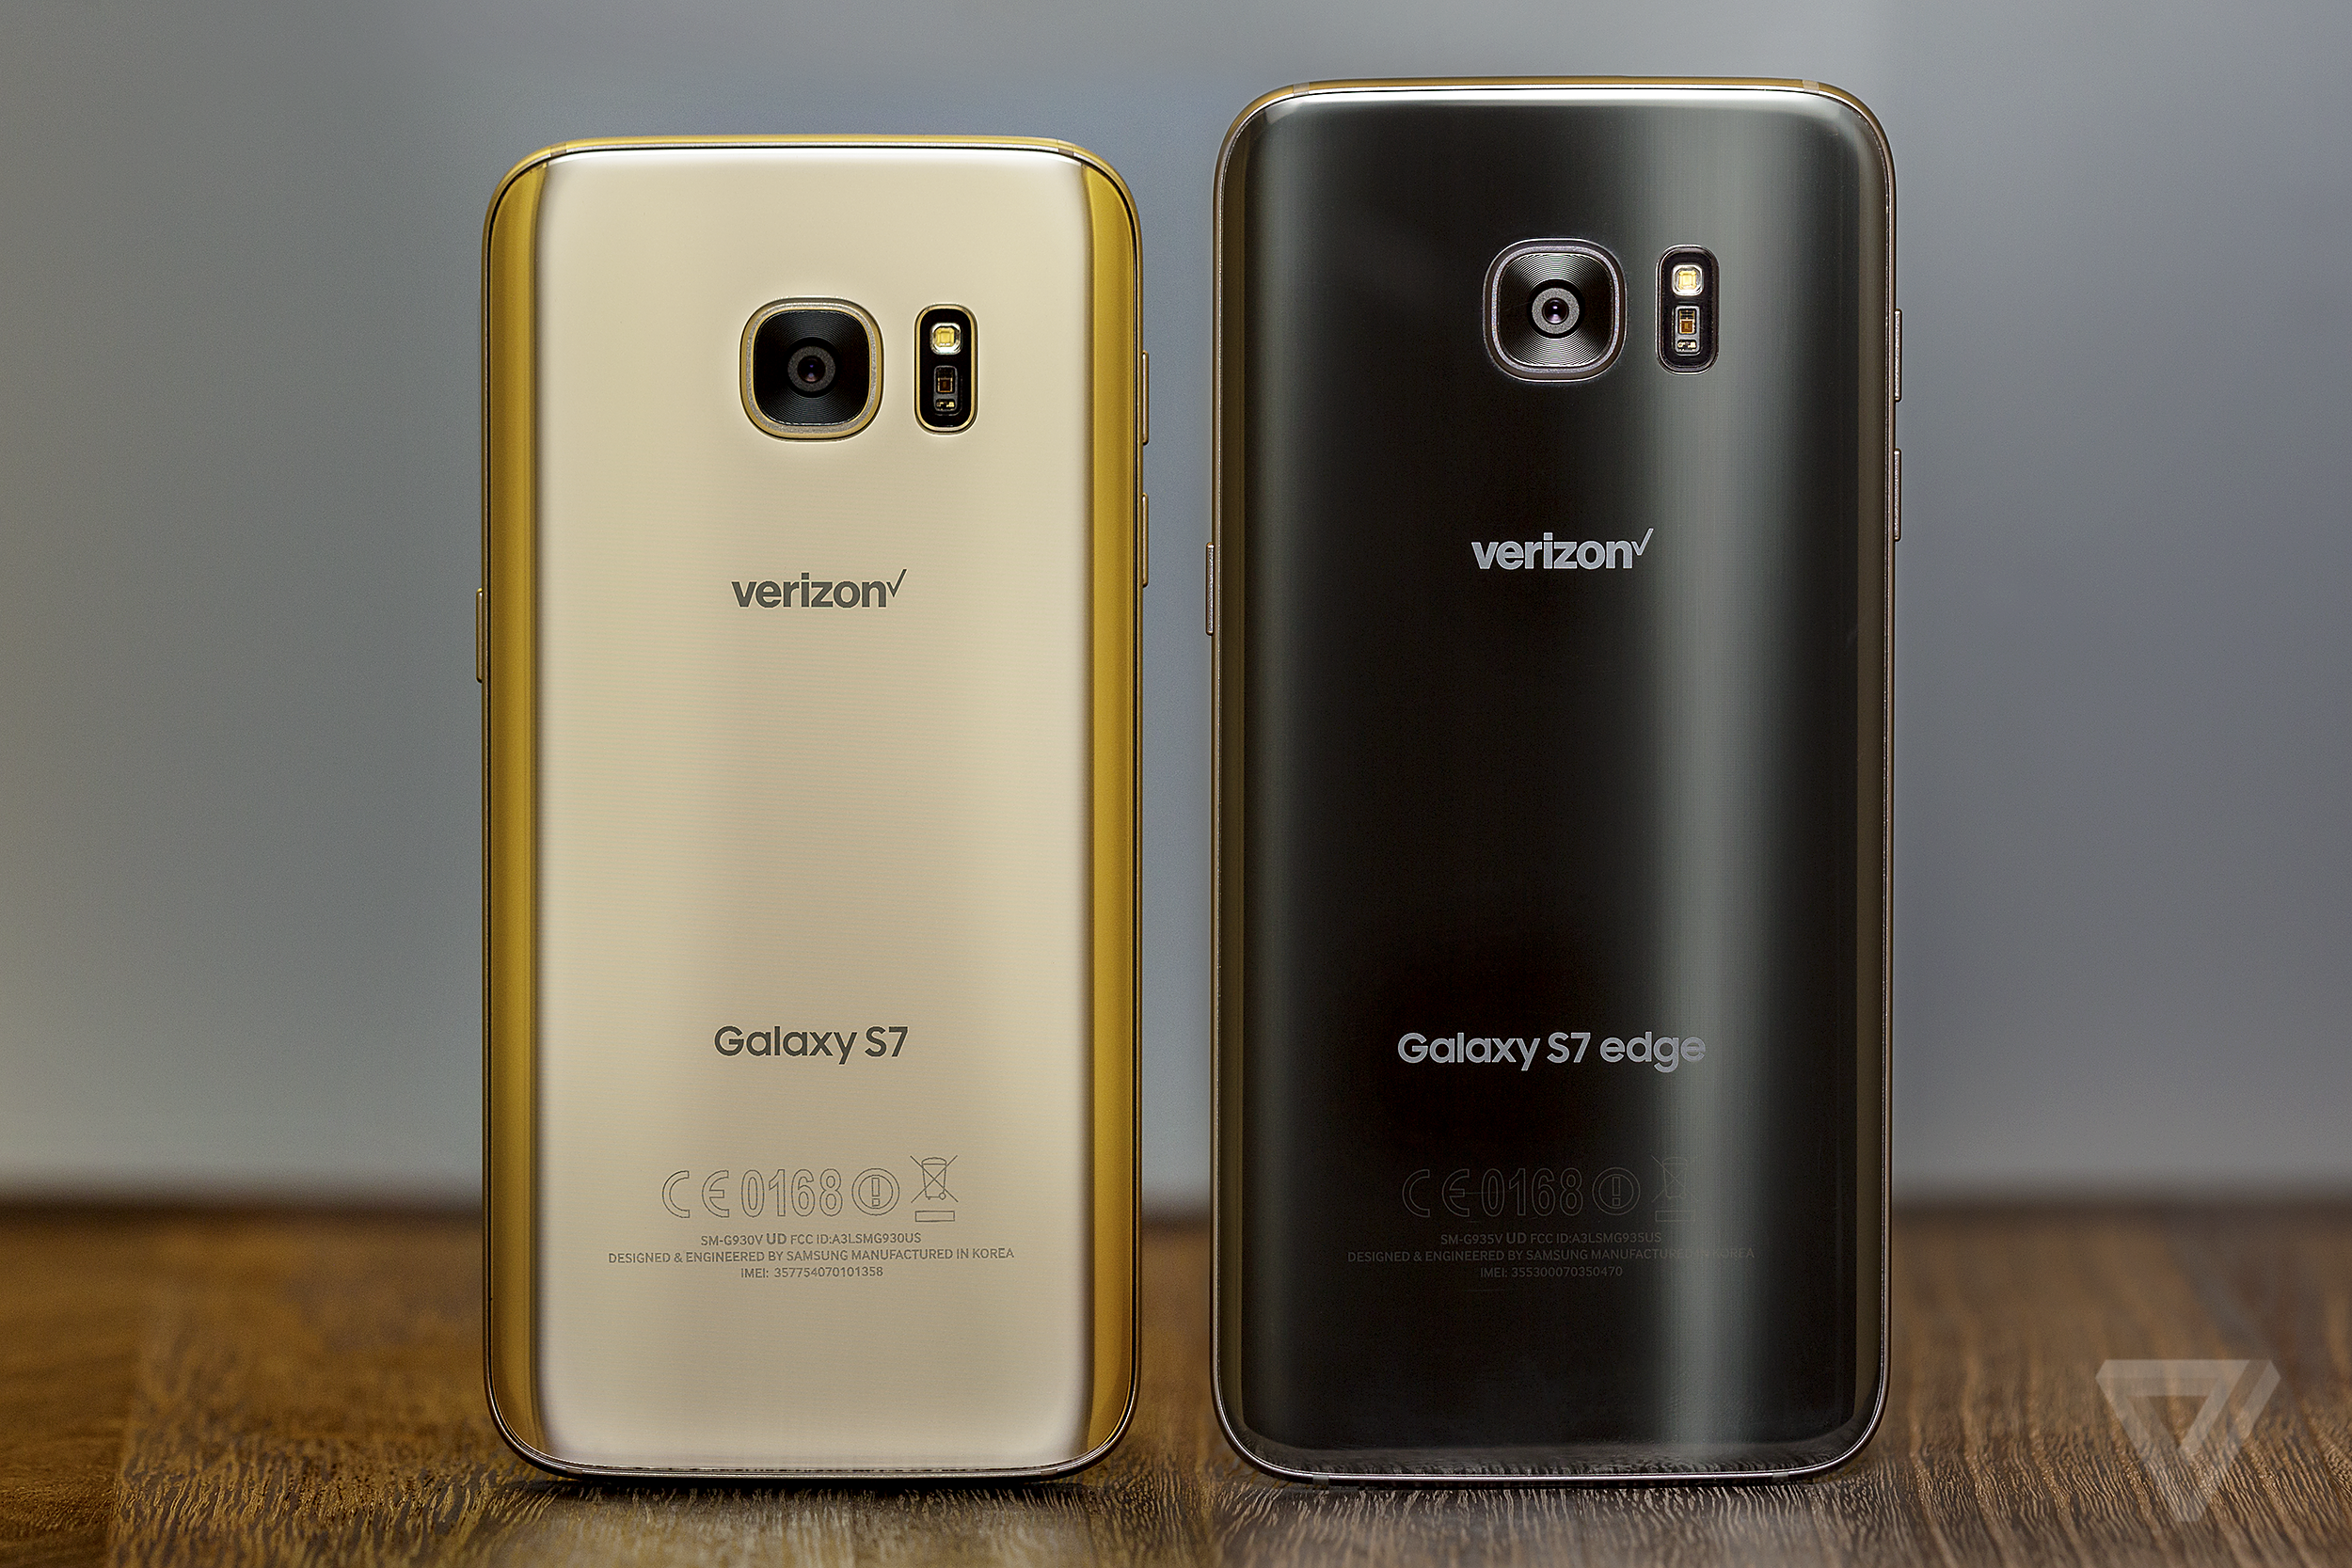 Samsung Galaxy S7 and S7 Edge in pictures